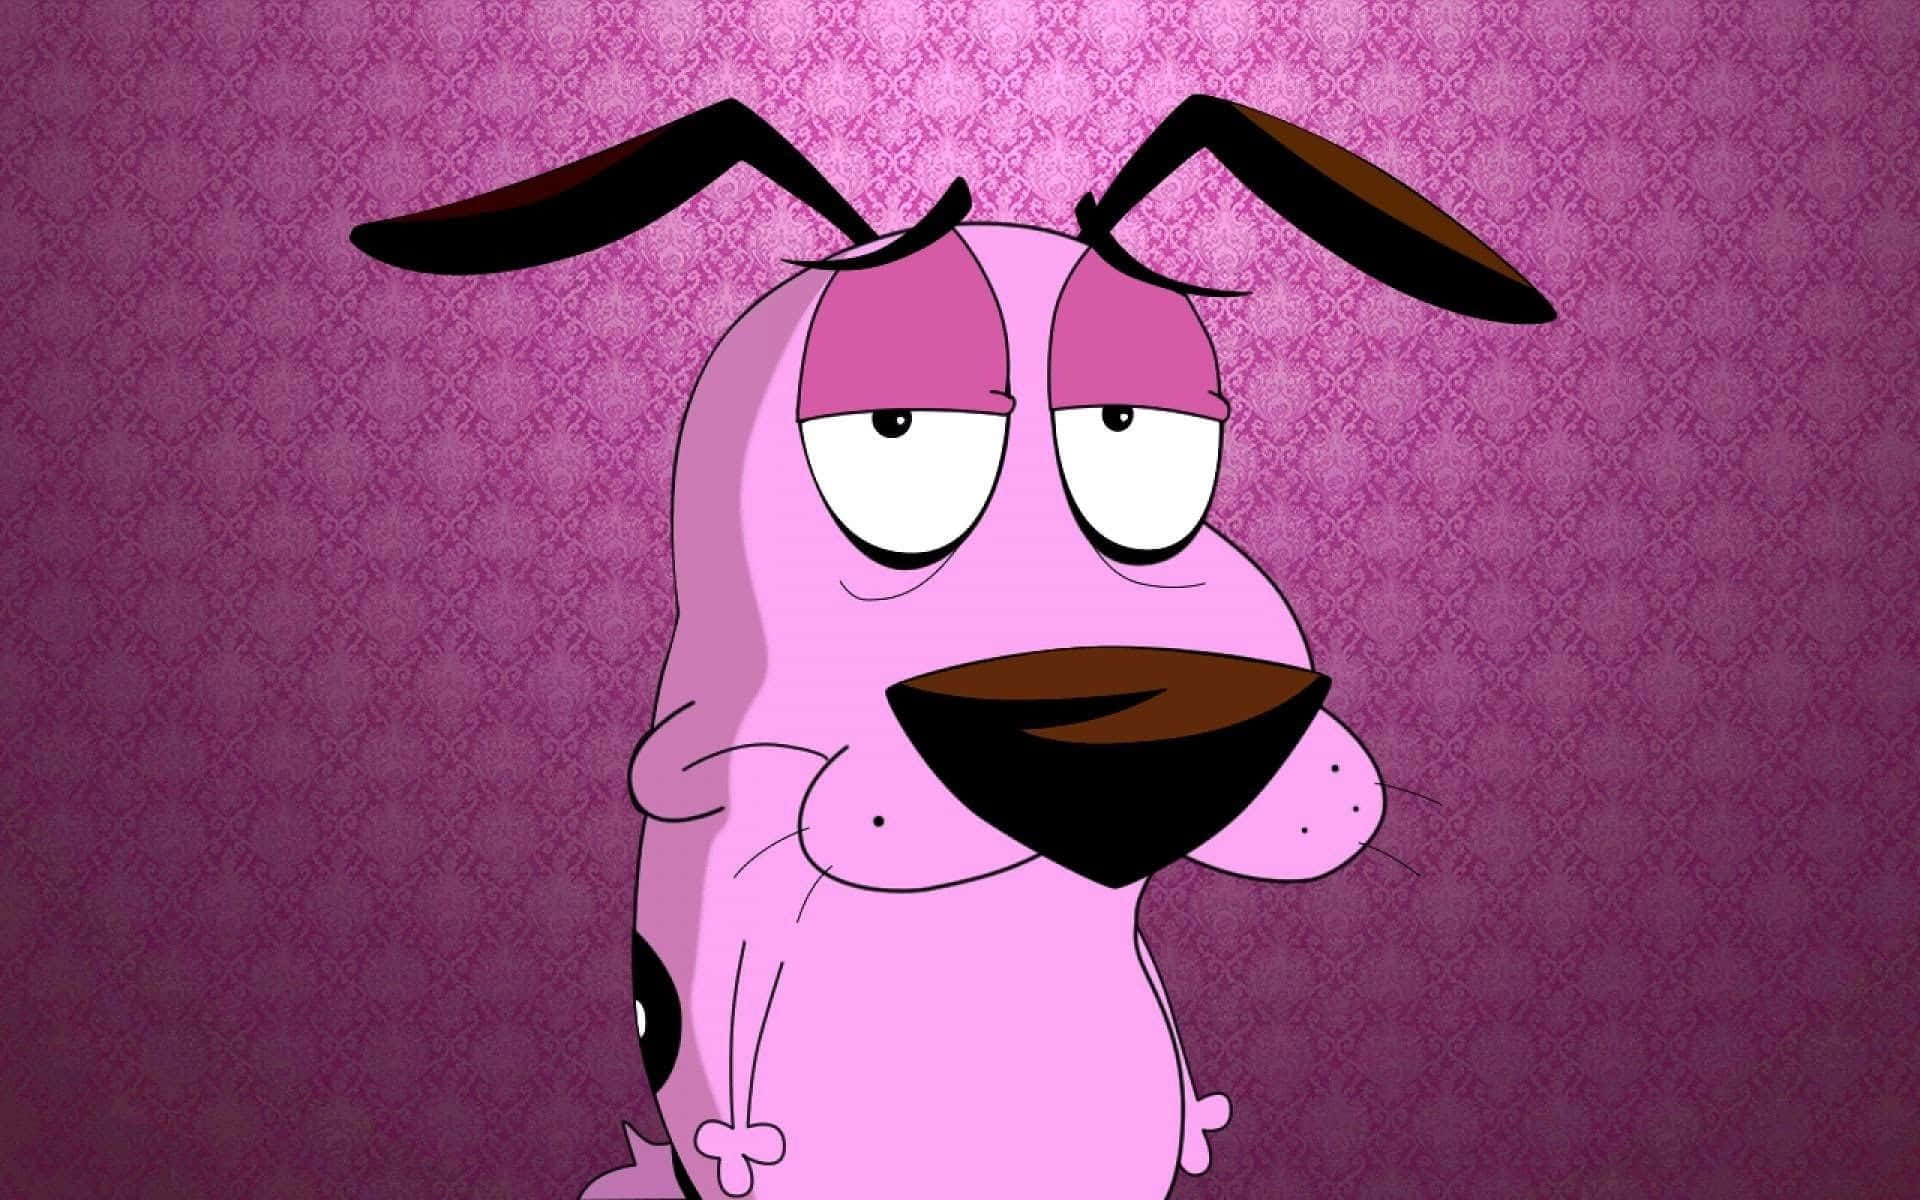 A Cartoon Dog With Black Eyes And Black Ears Background